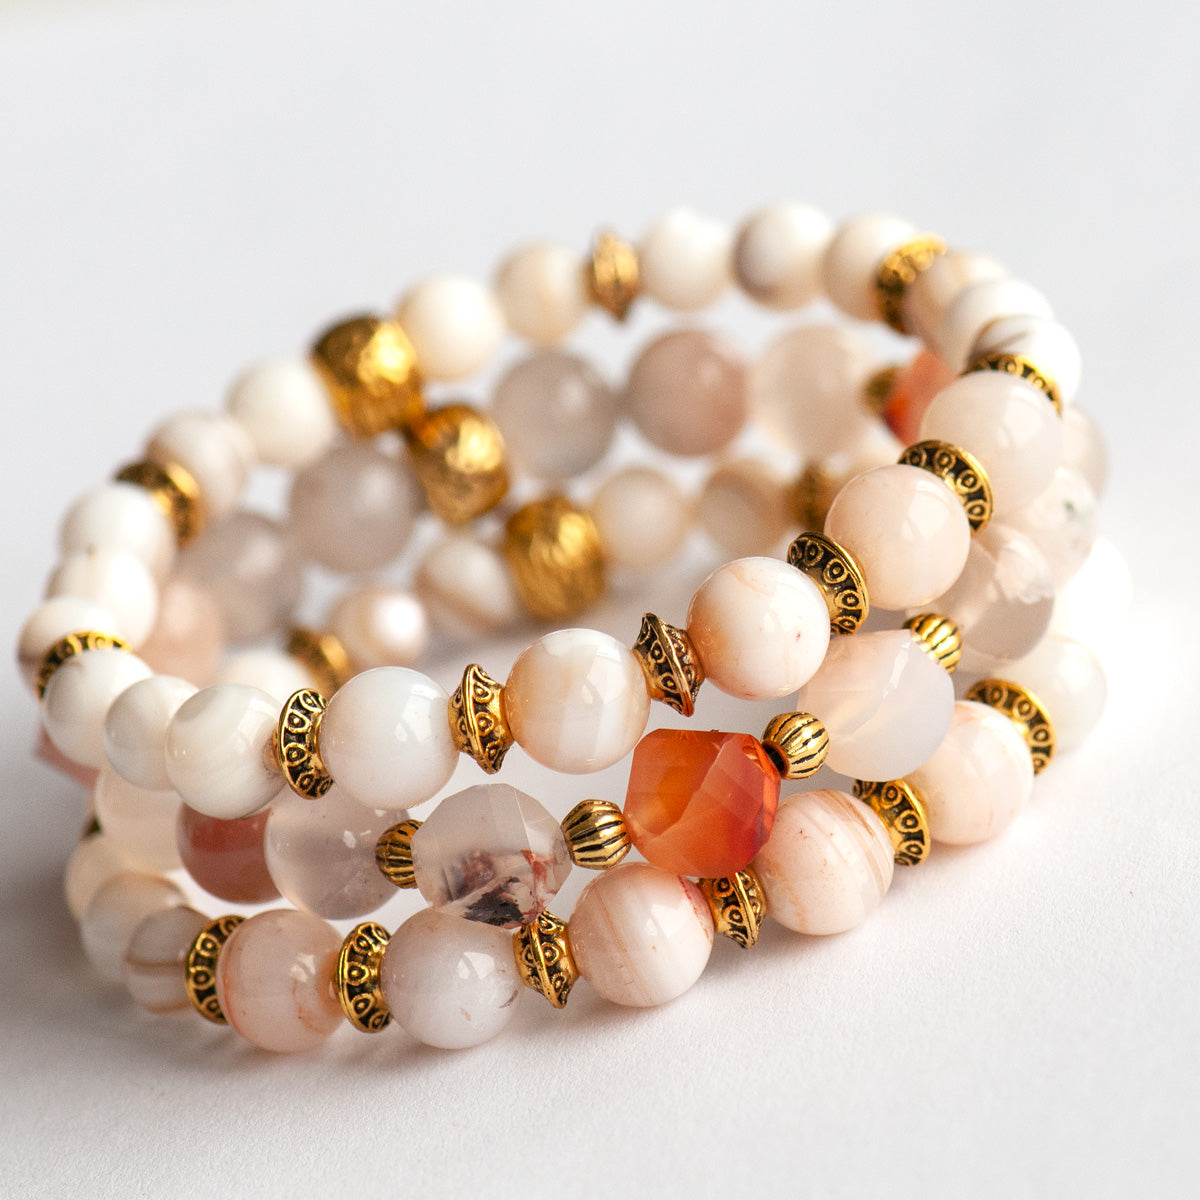 Peaches and Cream handmade gemstone bracelet set with cherry blossom agate beads and gold accents